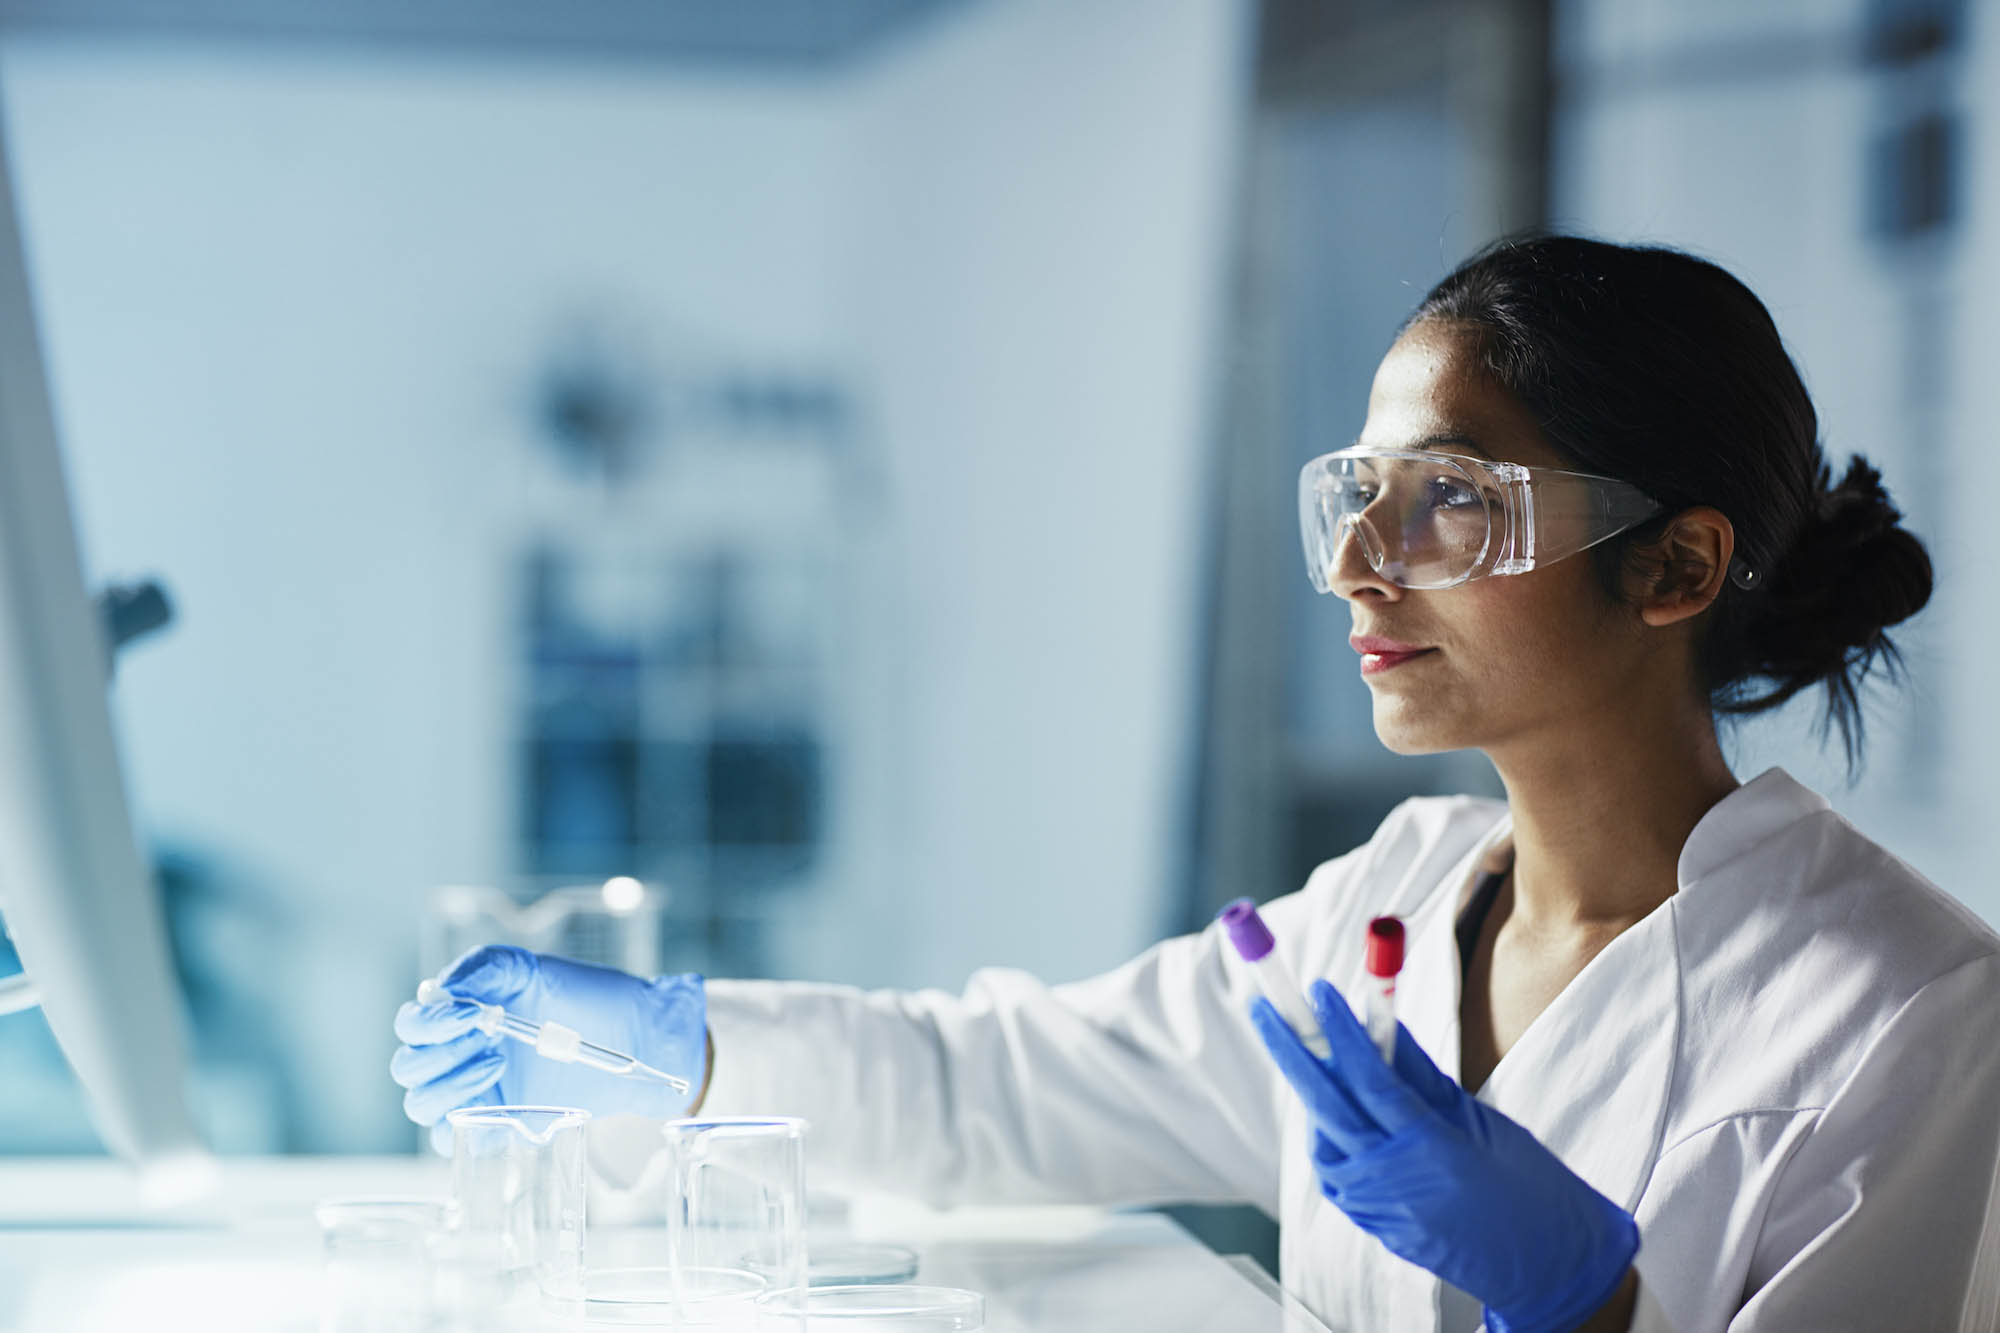 Female scientist conducting an experiment in a lab.